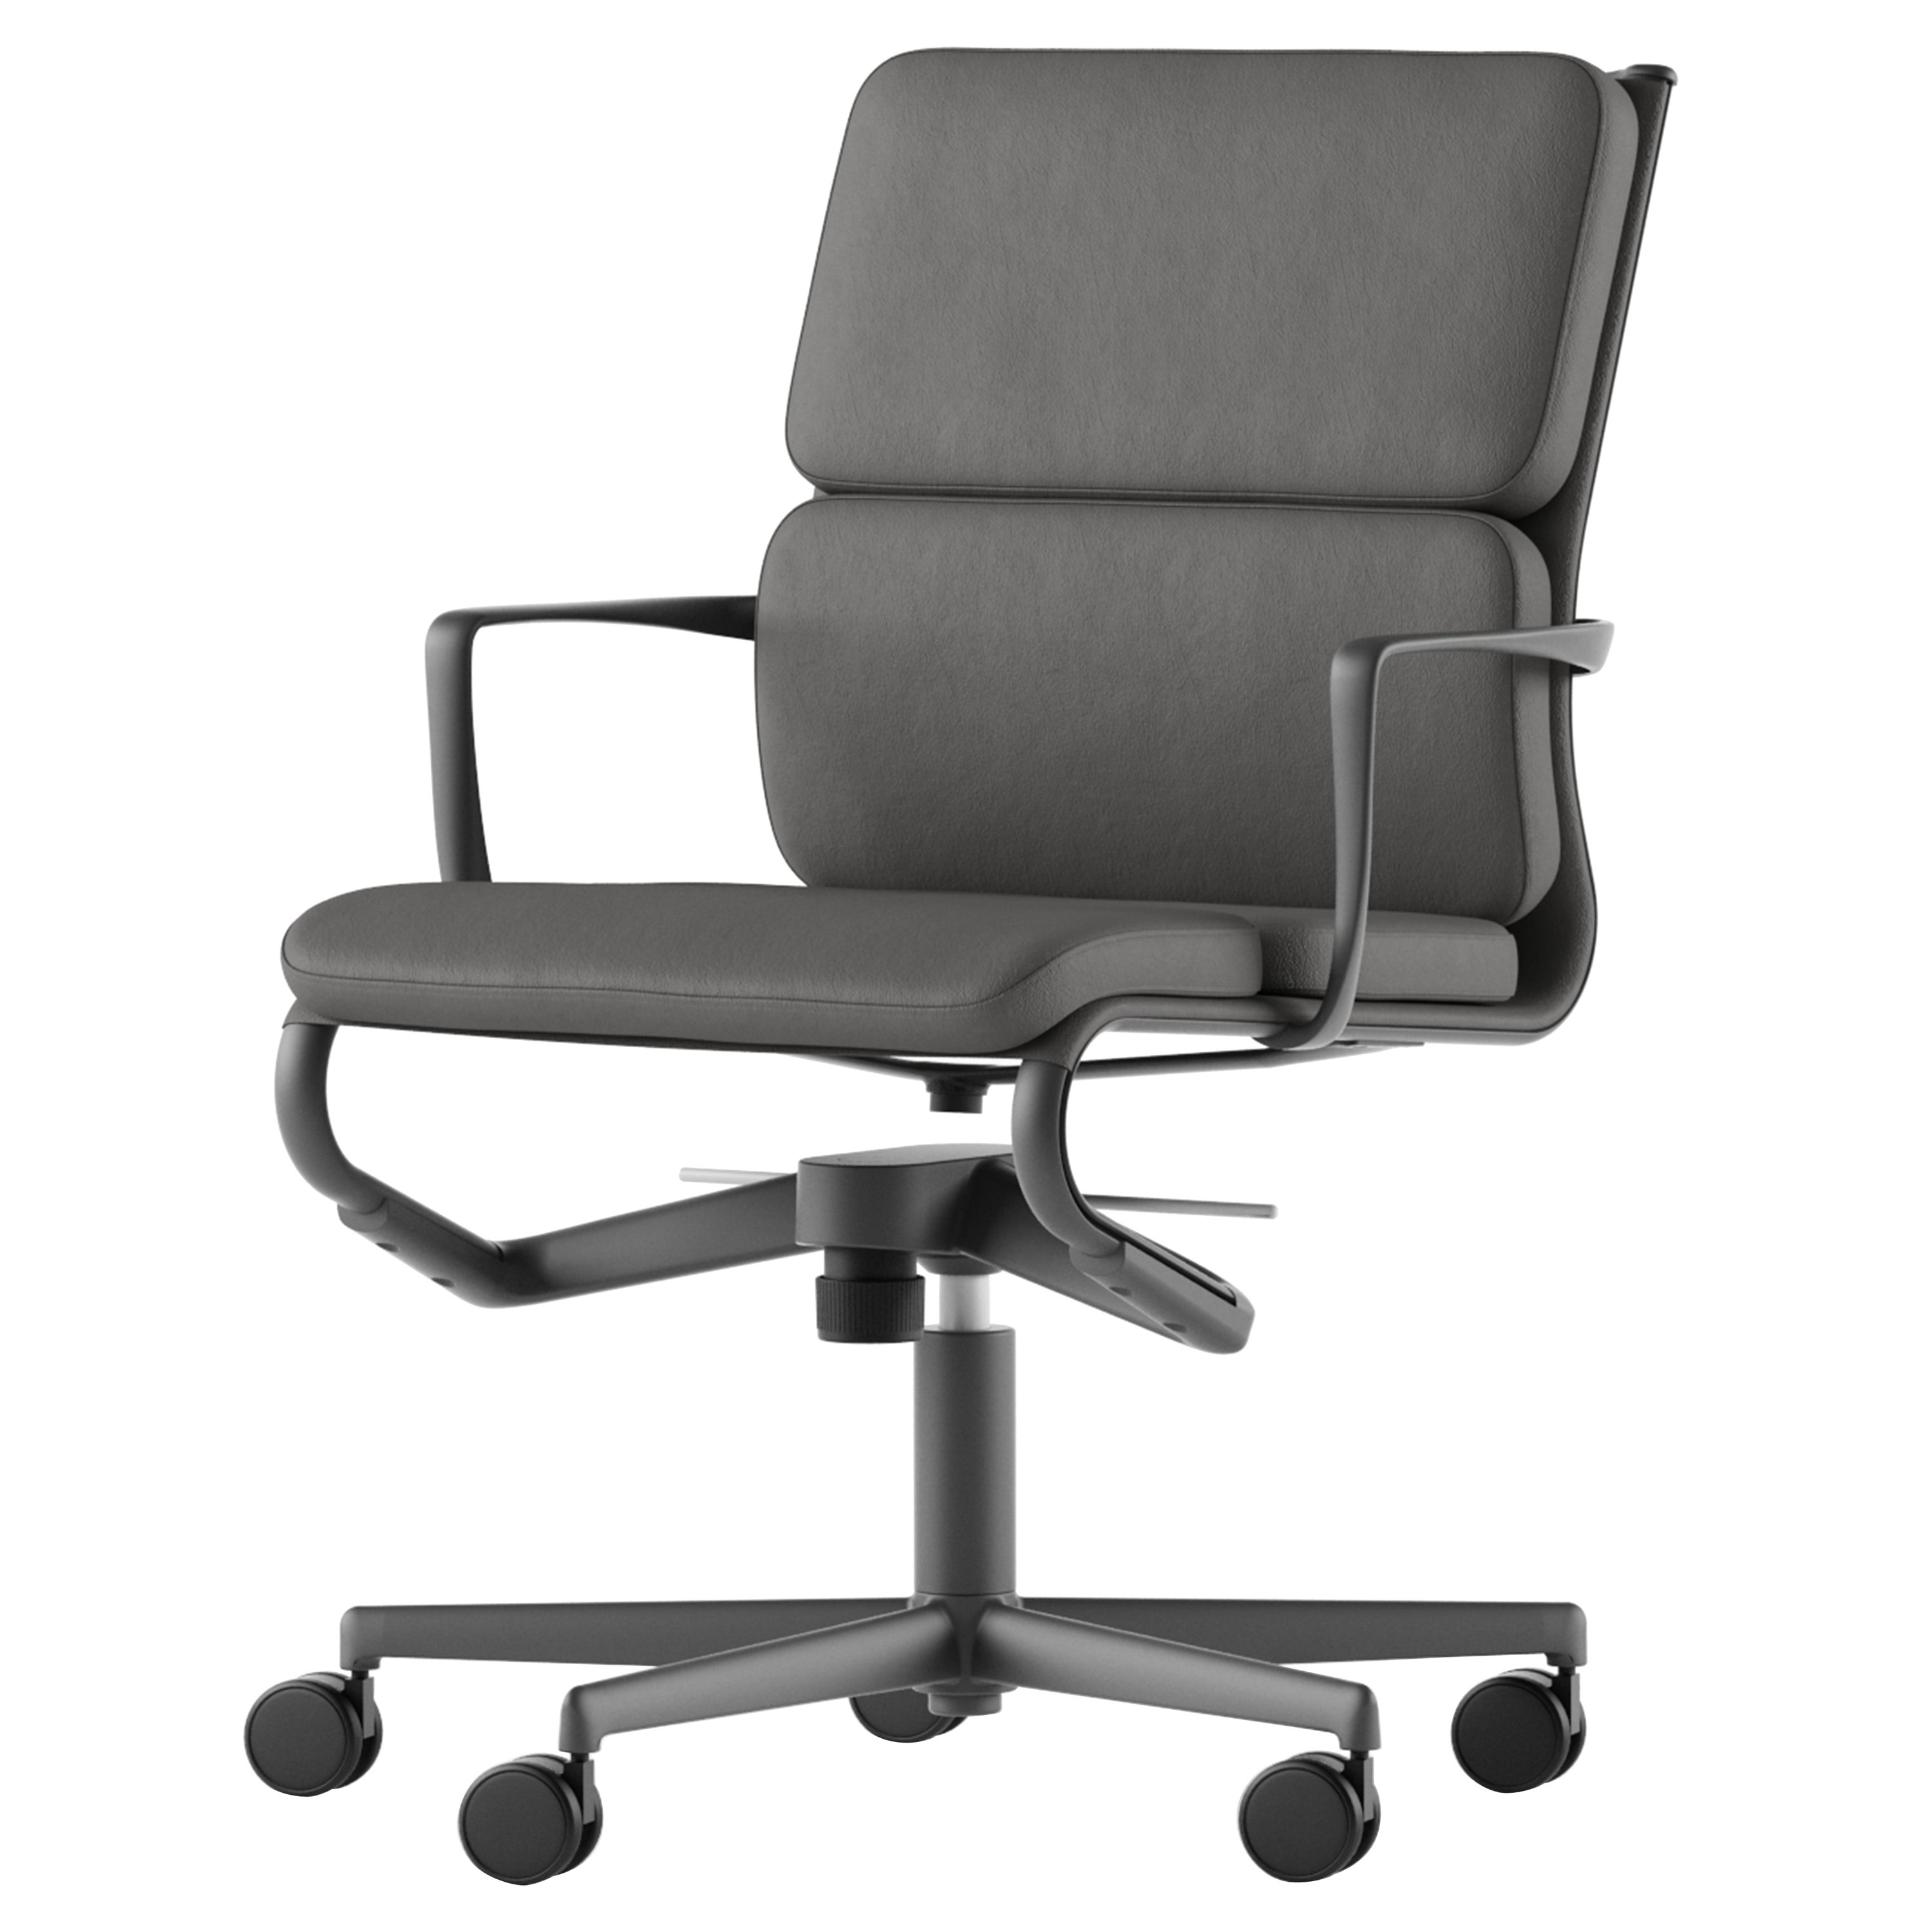 Alias 474 Rollingframe 52 Soft Chair in Grey Seat with Lacquered Aluminum Frame For Sale